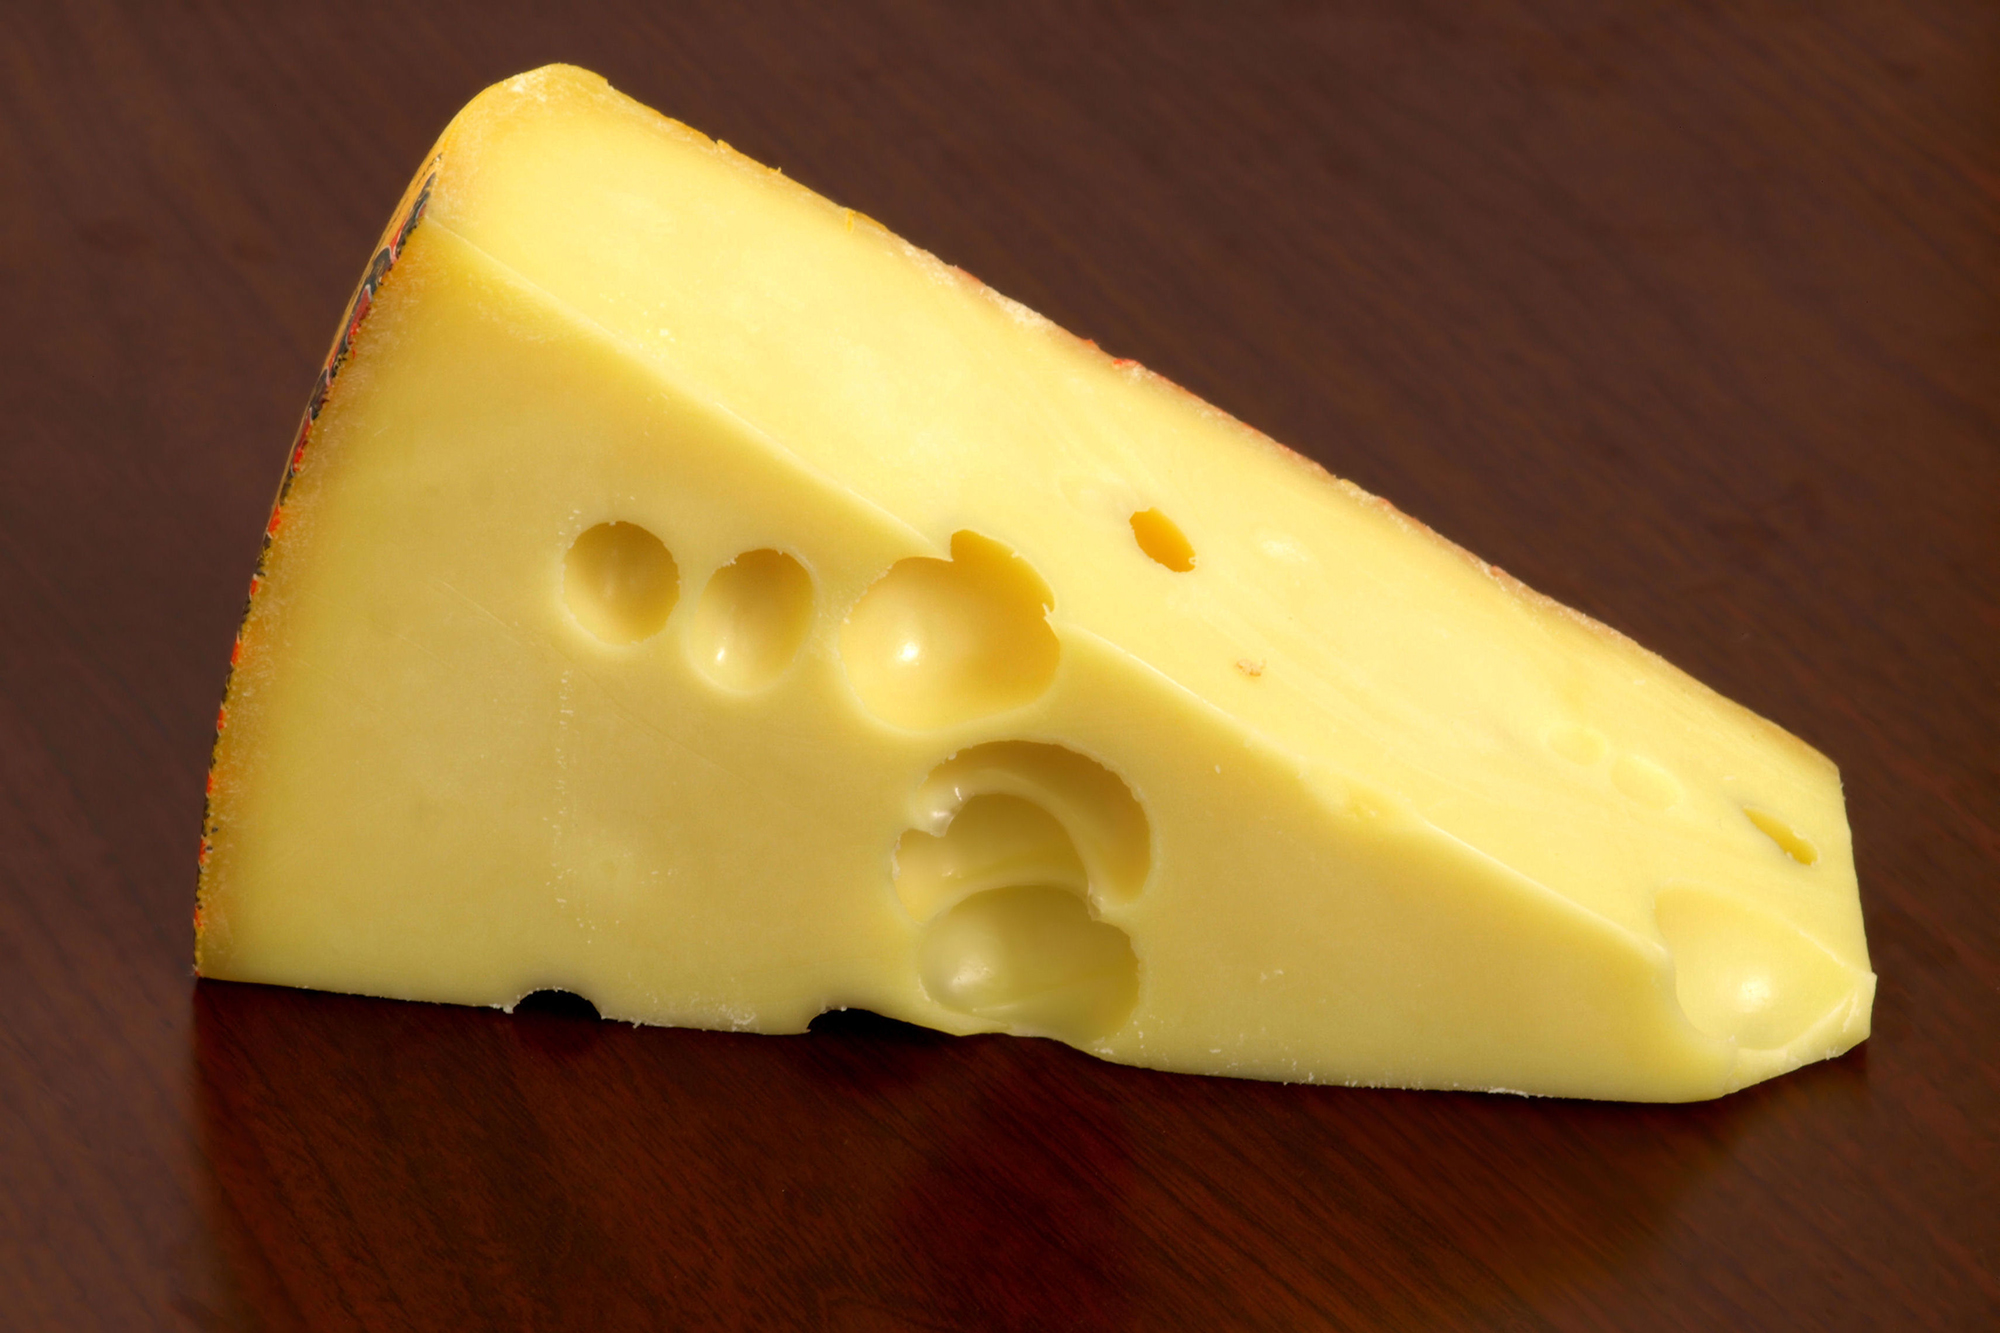 A Norwegian cheese was found to promote facets of health.